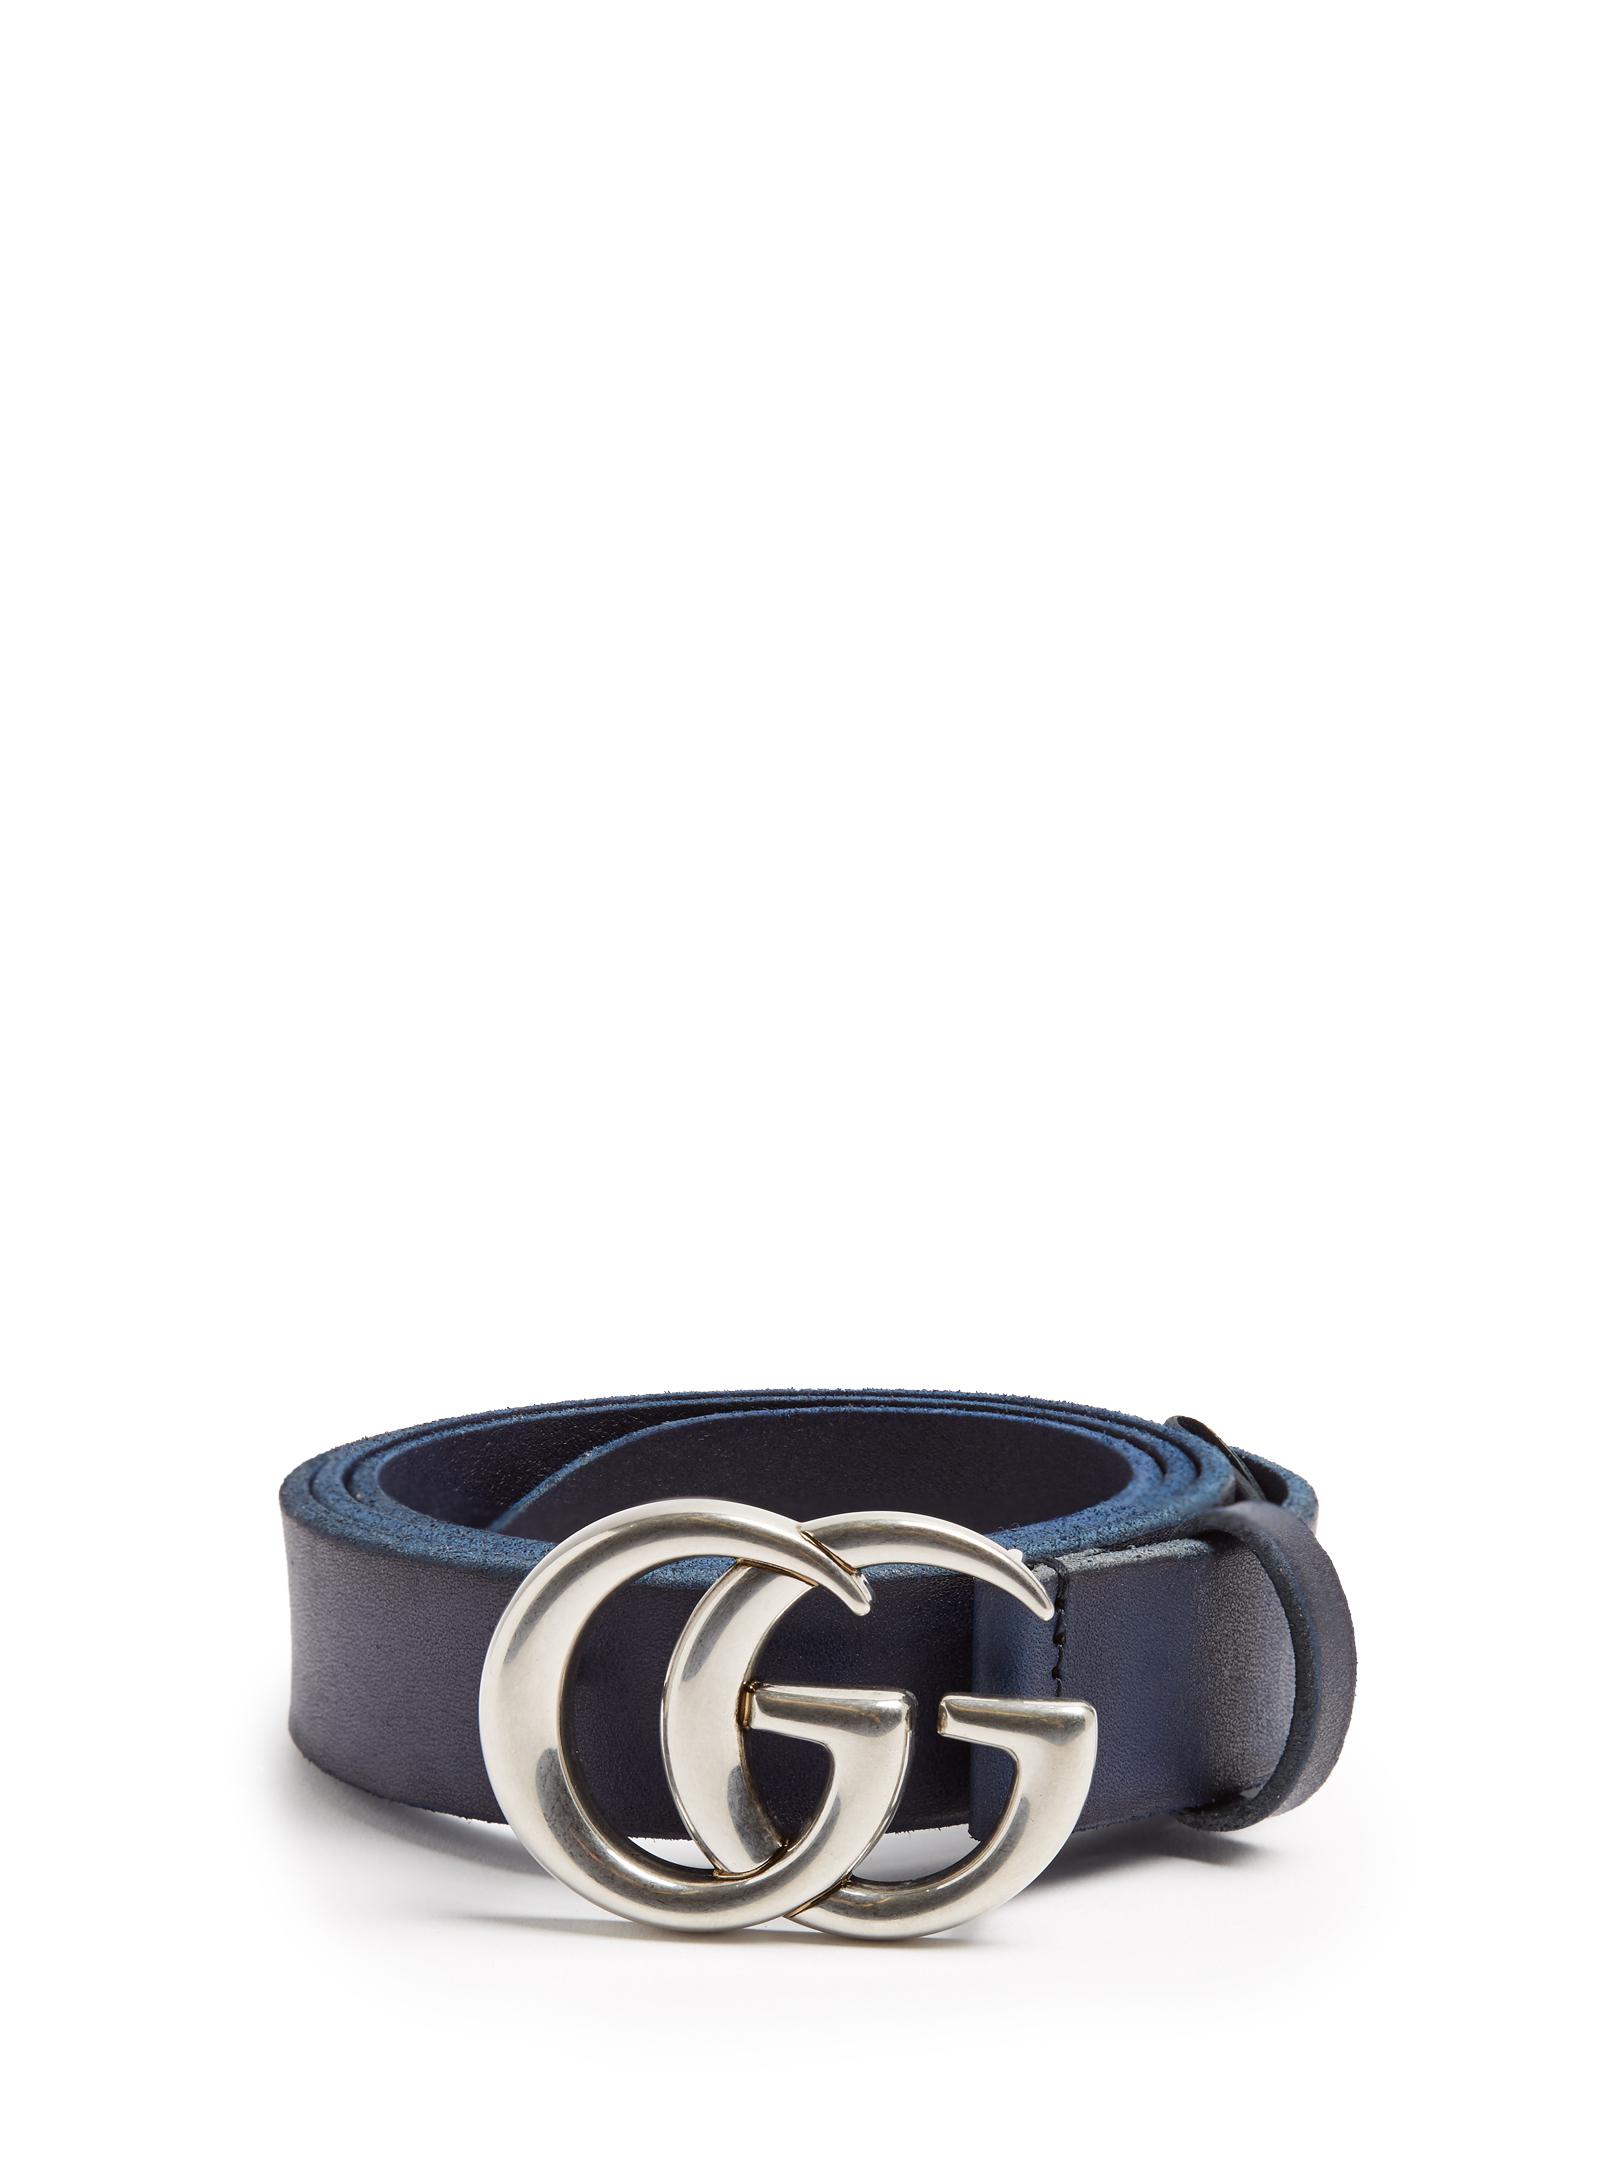 Gucci Gg Marmont Leather Belt in Blue for Men - Lyst